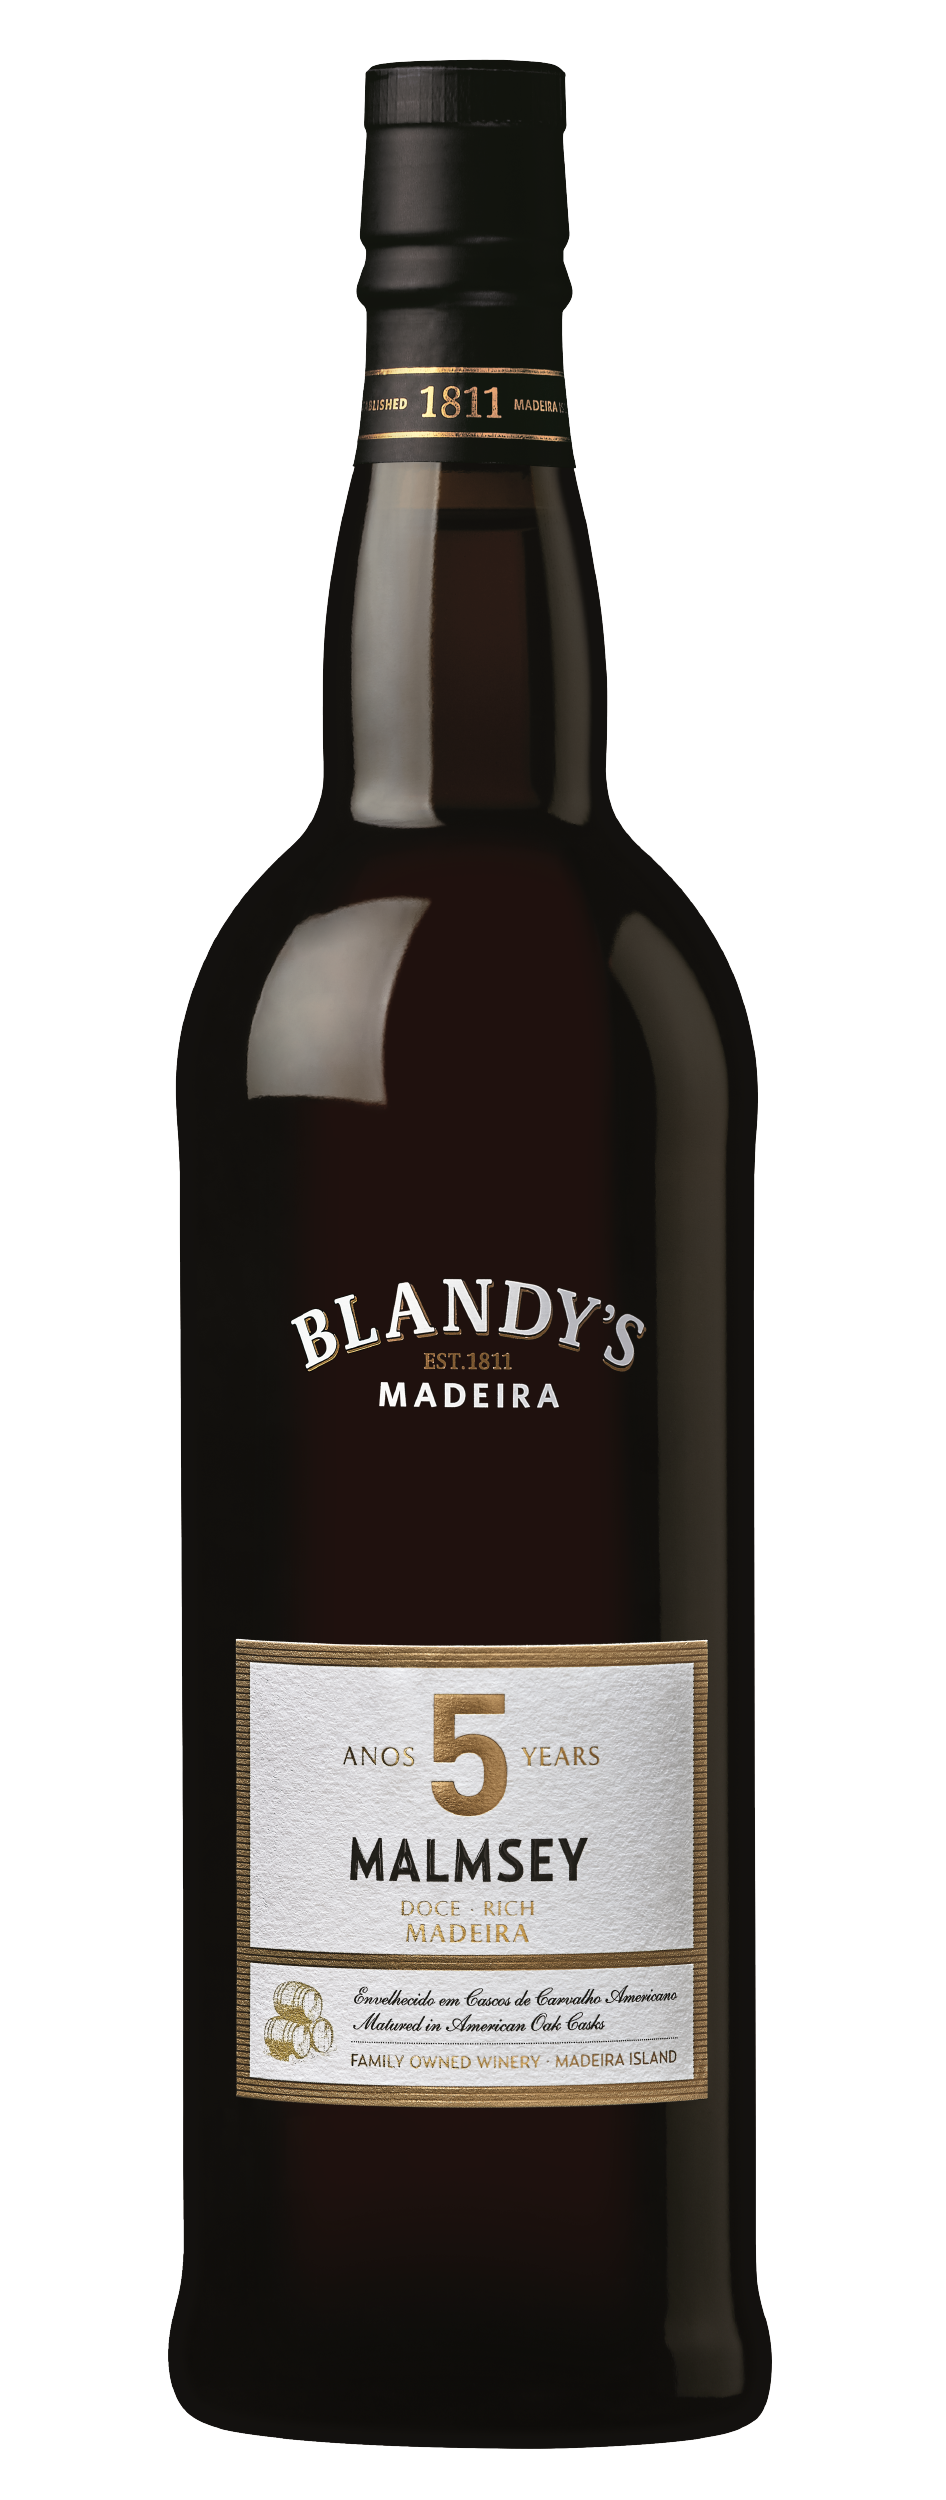 Product Image for BLANDY'S MALMSEY 5 YEAR OLD